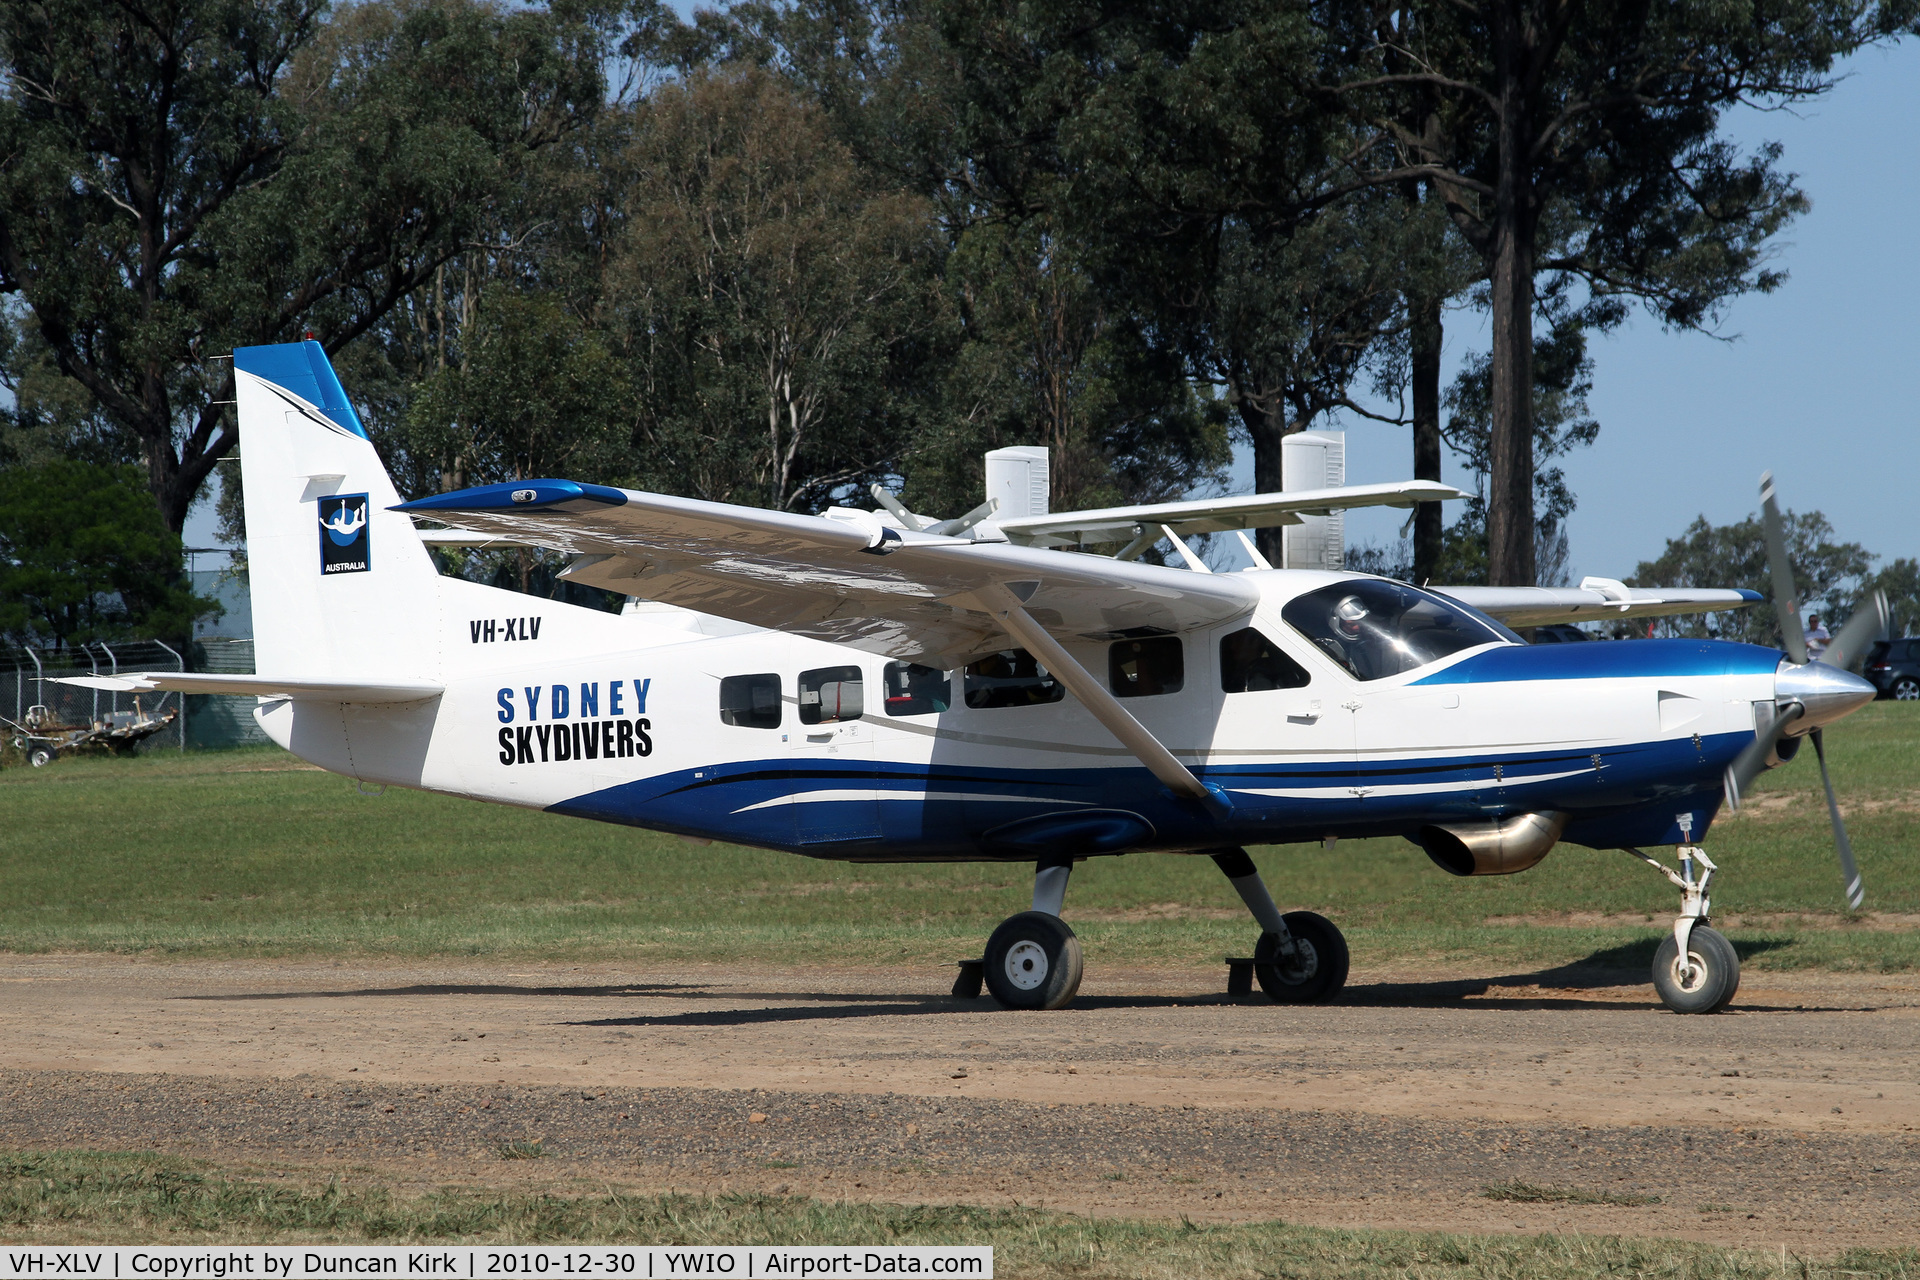 VH-XLV, Cessna 208 Caravan 1 C/N 20800053, One of several planes used by Sydney Skydivers at Picton